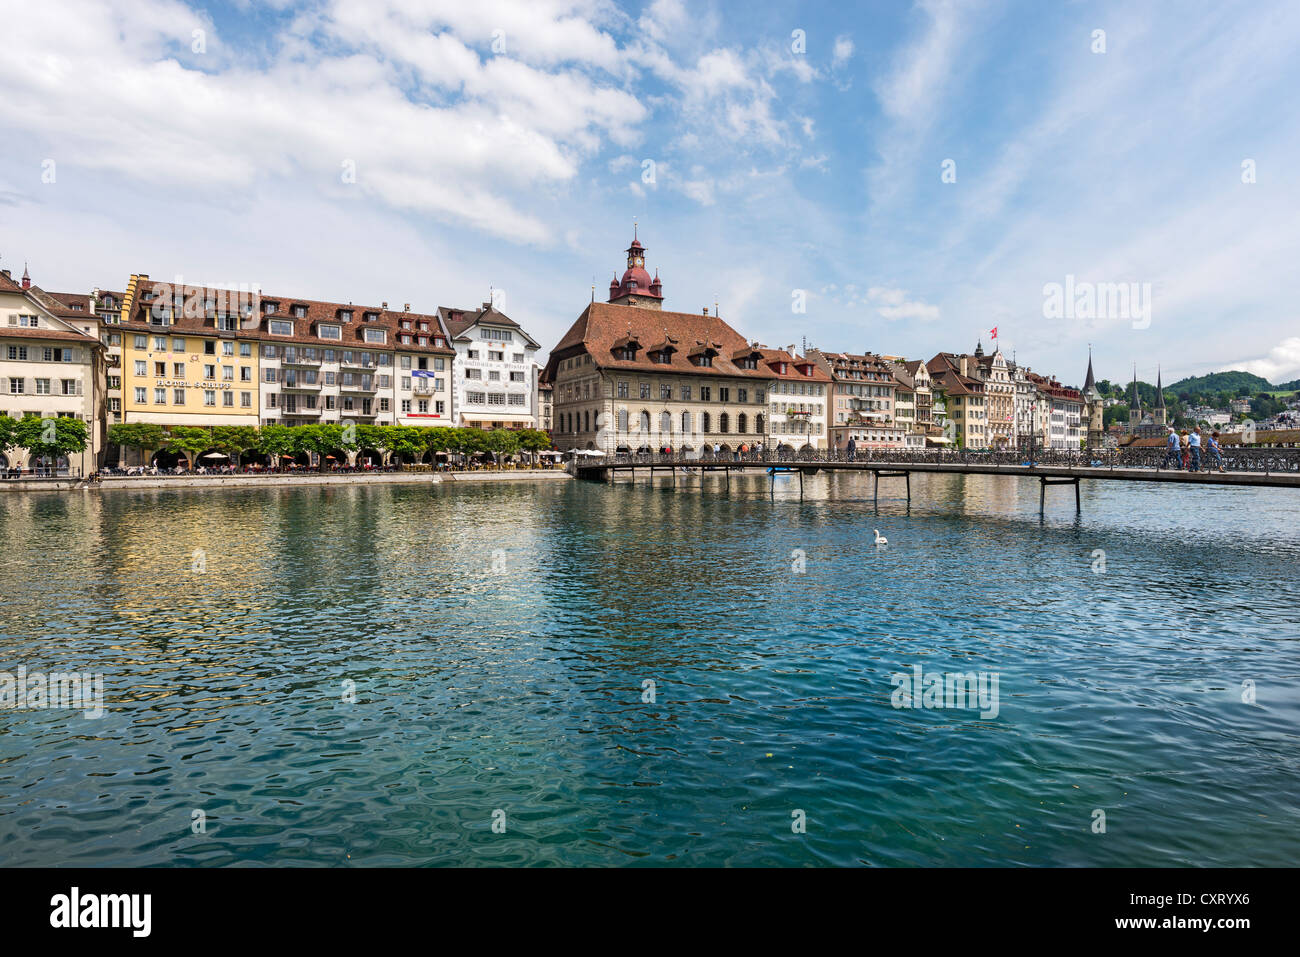 View across the Reuss river, historic disrict of Lucerne and the town hall, Rathaussteg bridge in the foreground, Lucerne Stock Photo